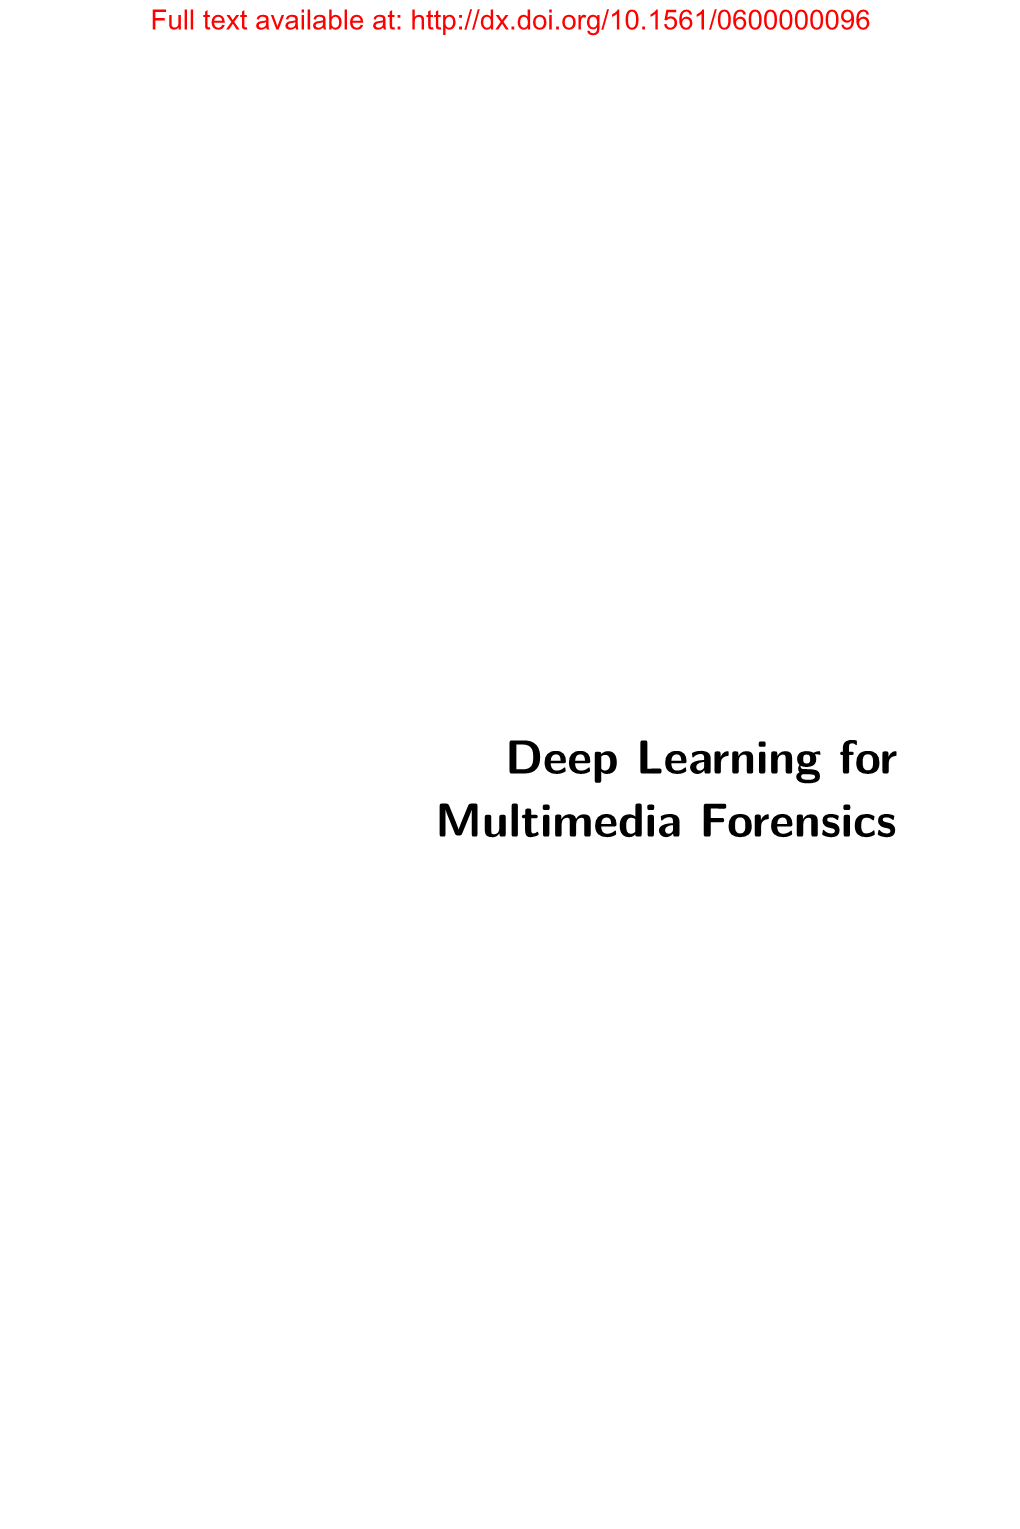 Deep Learning for Multimedia Forensics Full Text Available At